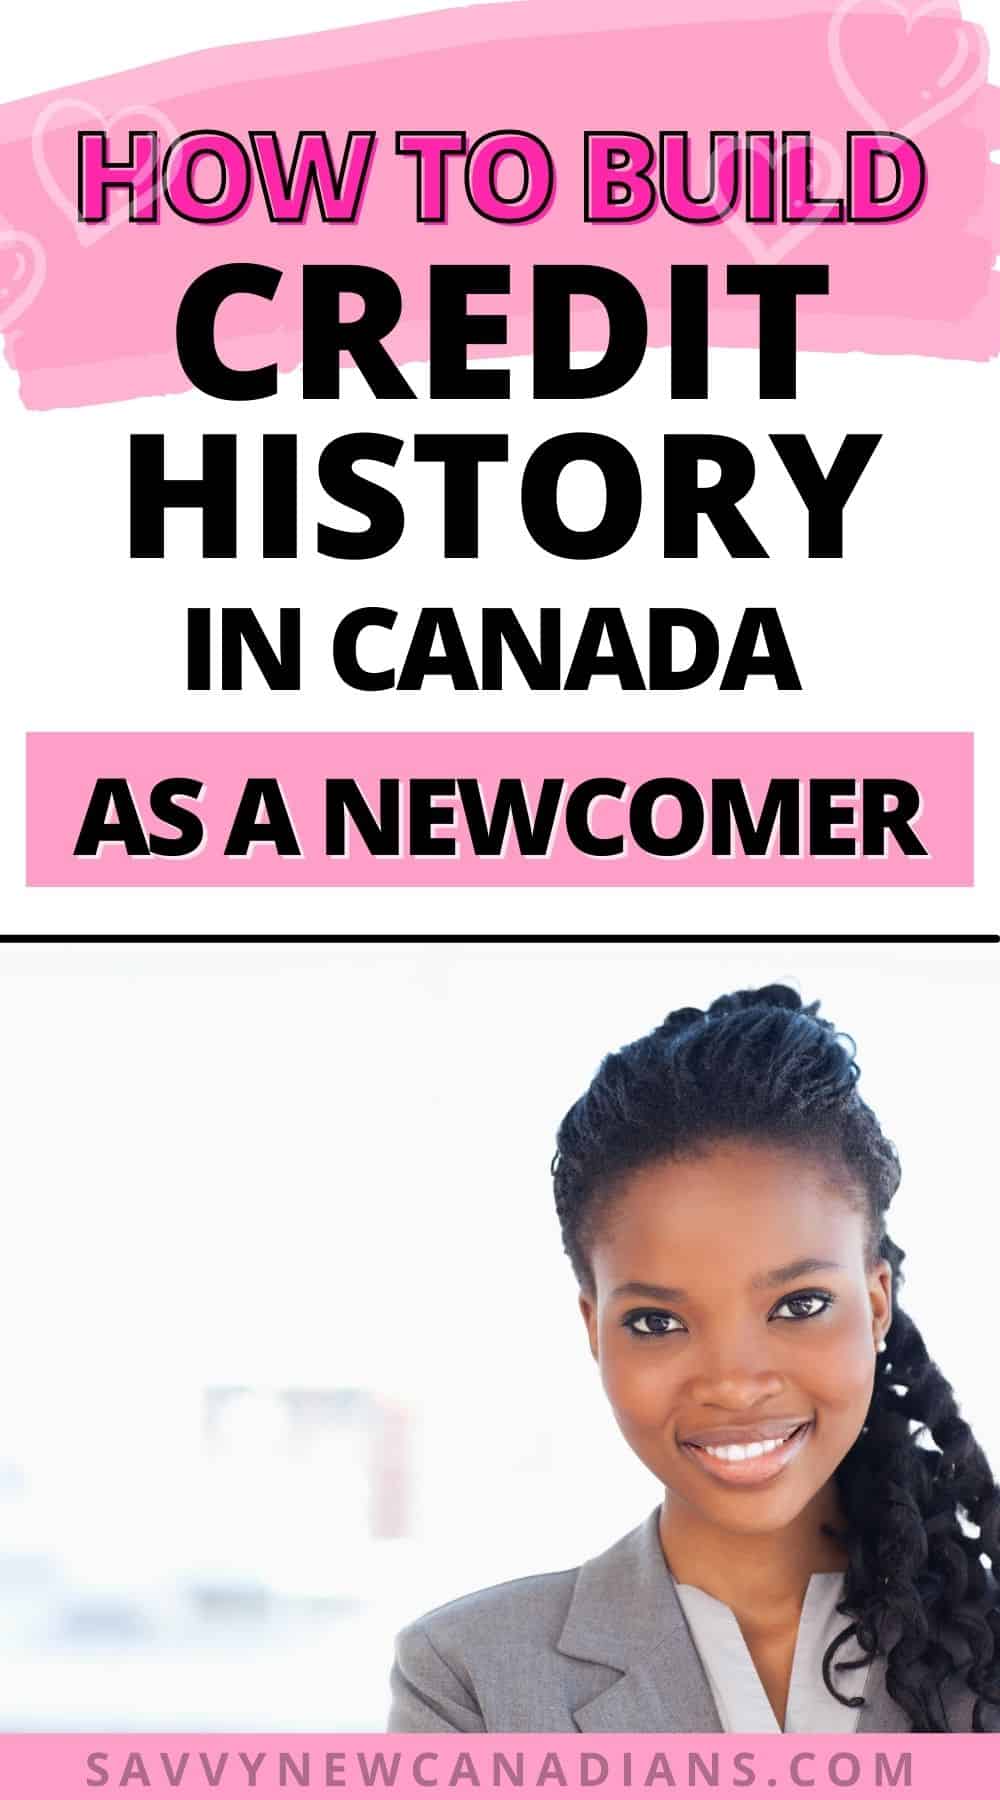 How To Build Good Credit History in Canada as a Newcomer